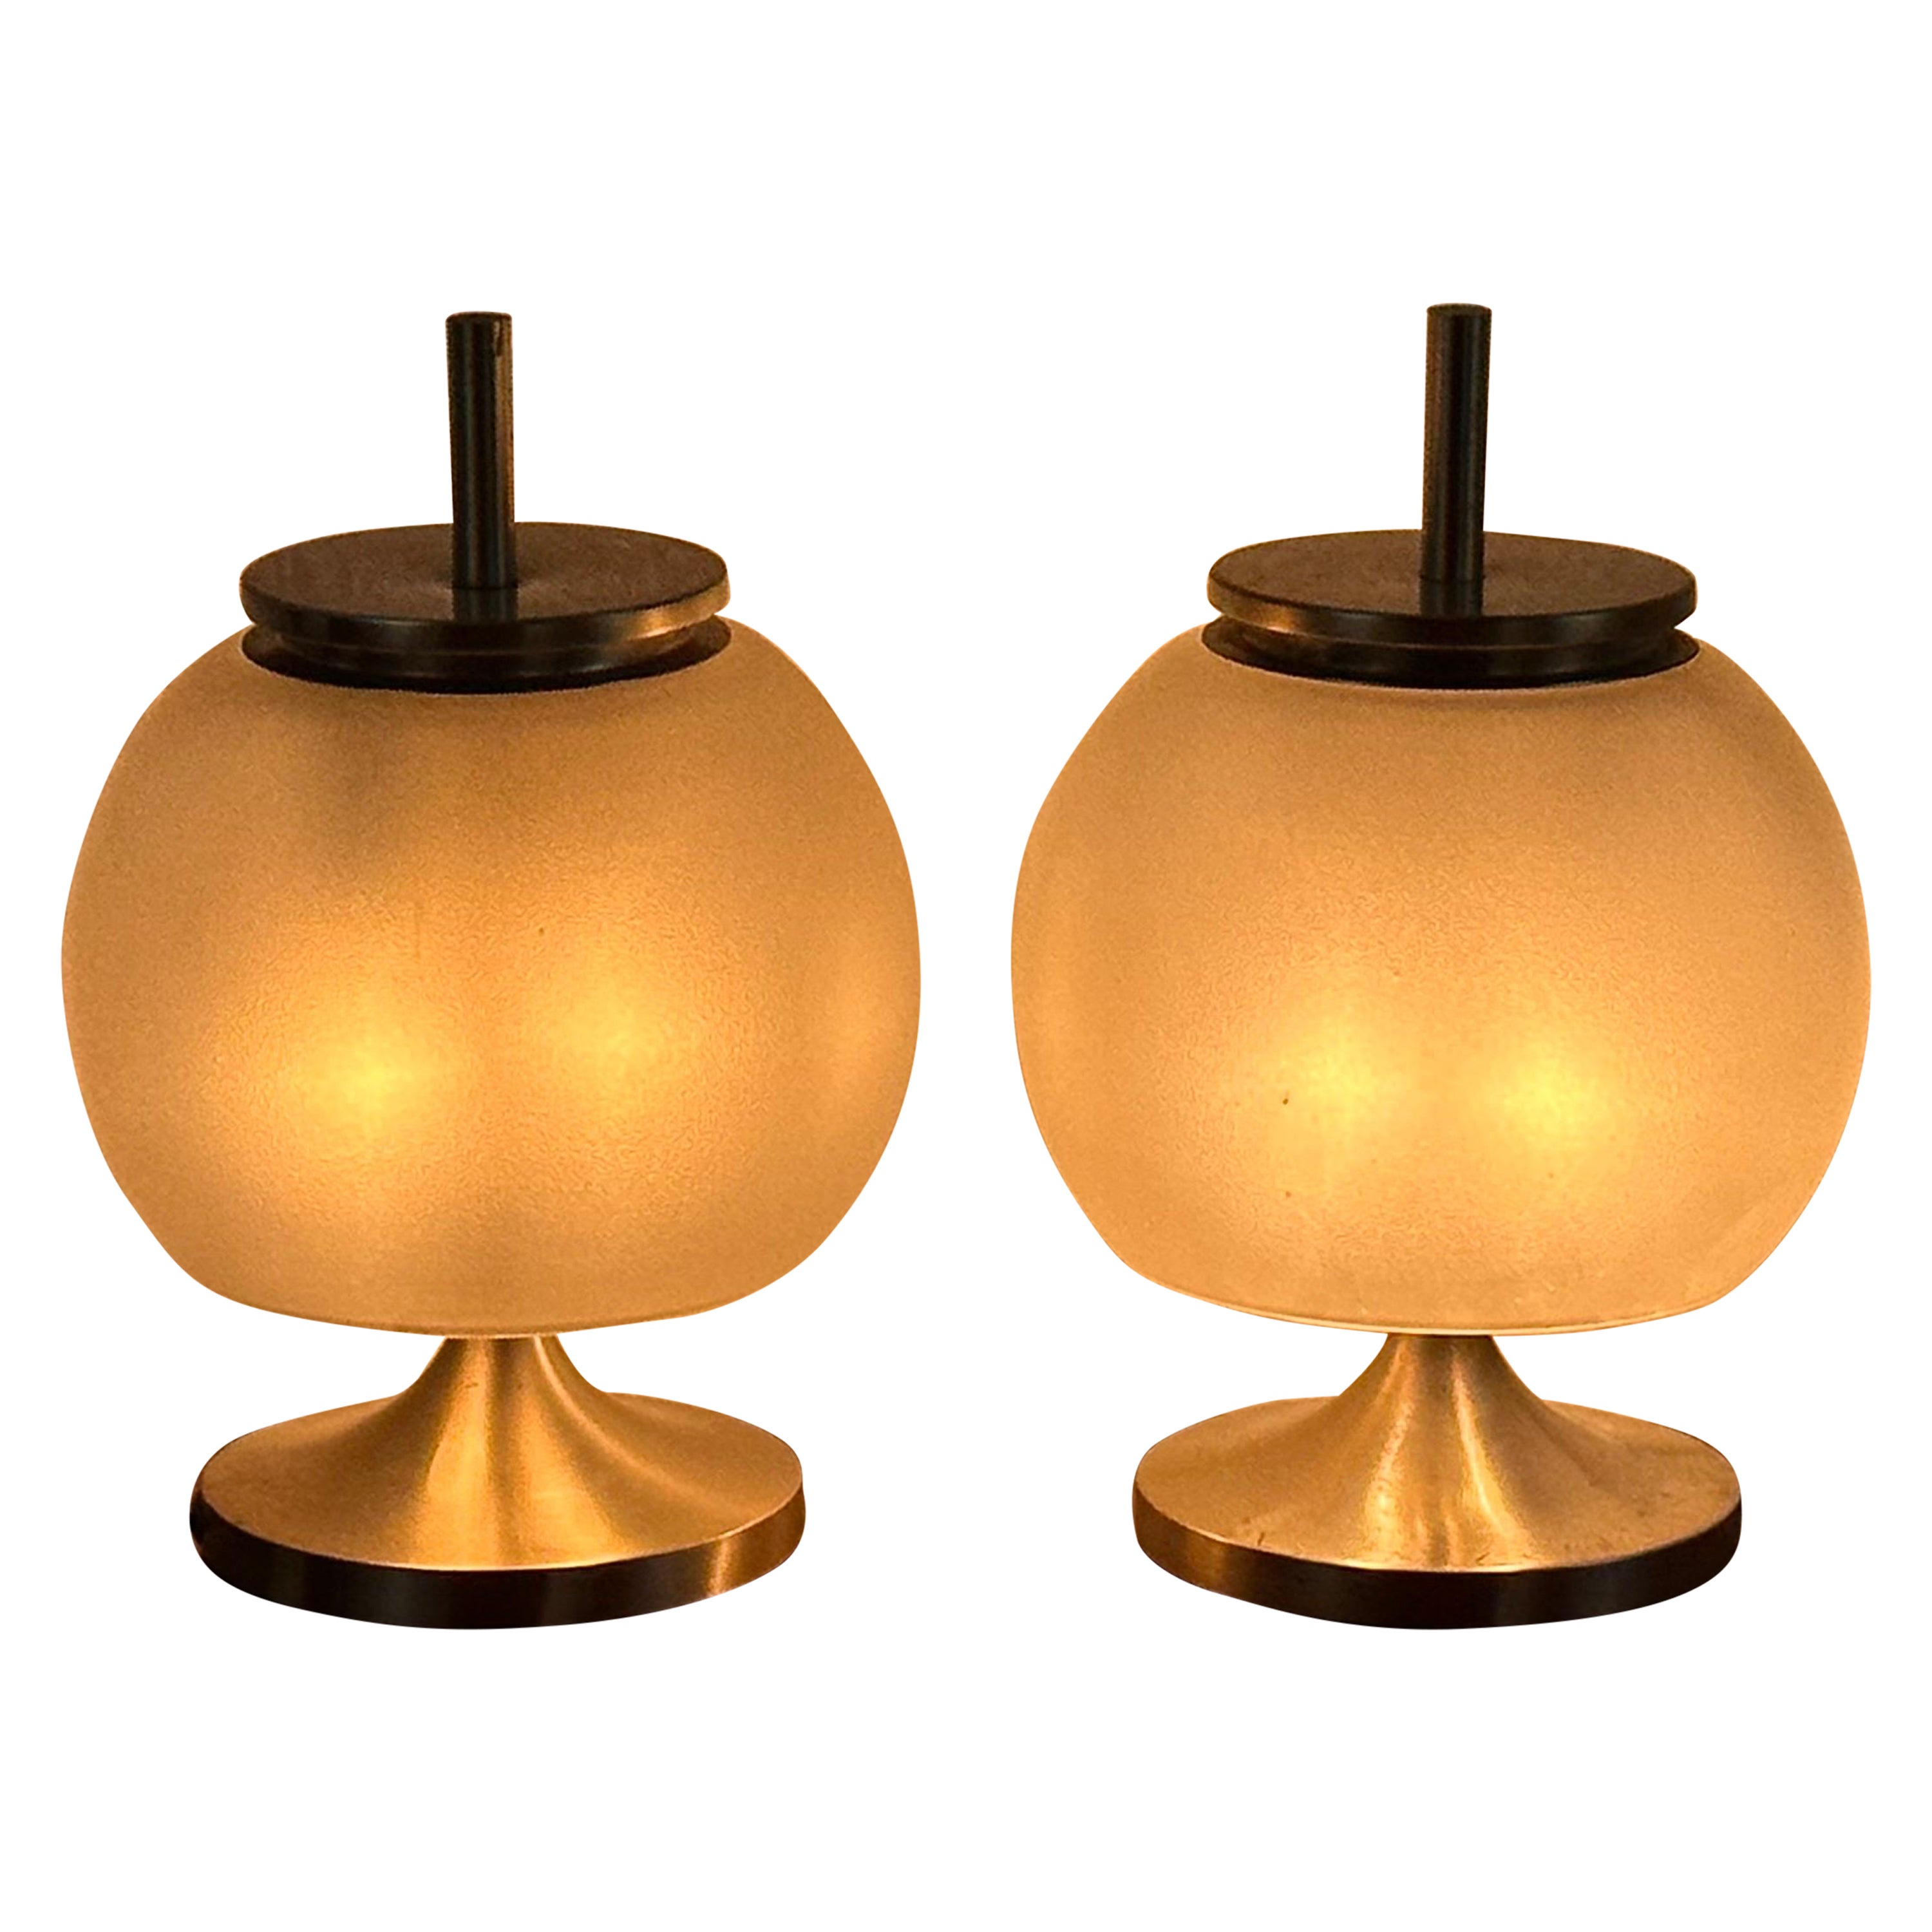 Pair of “Chi” Lamps by Emma Gismondi Schweinberger for Artemide, 1960s